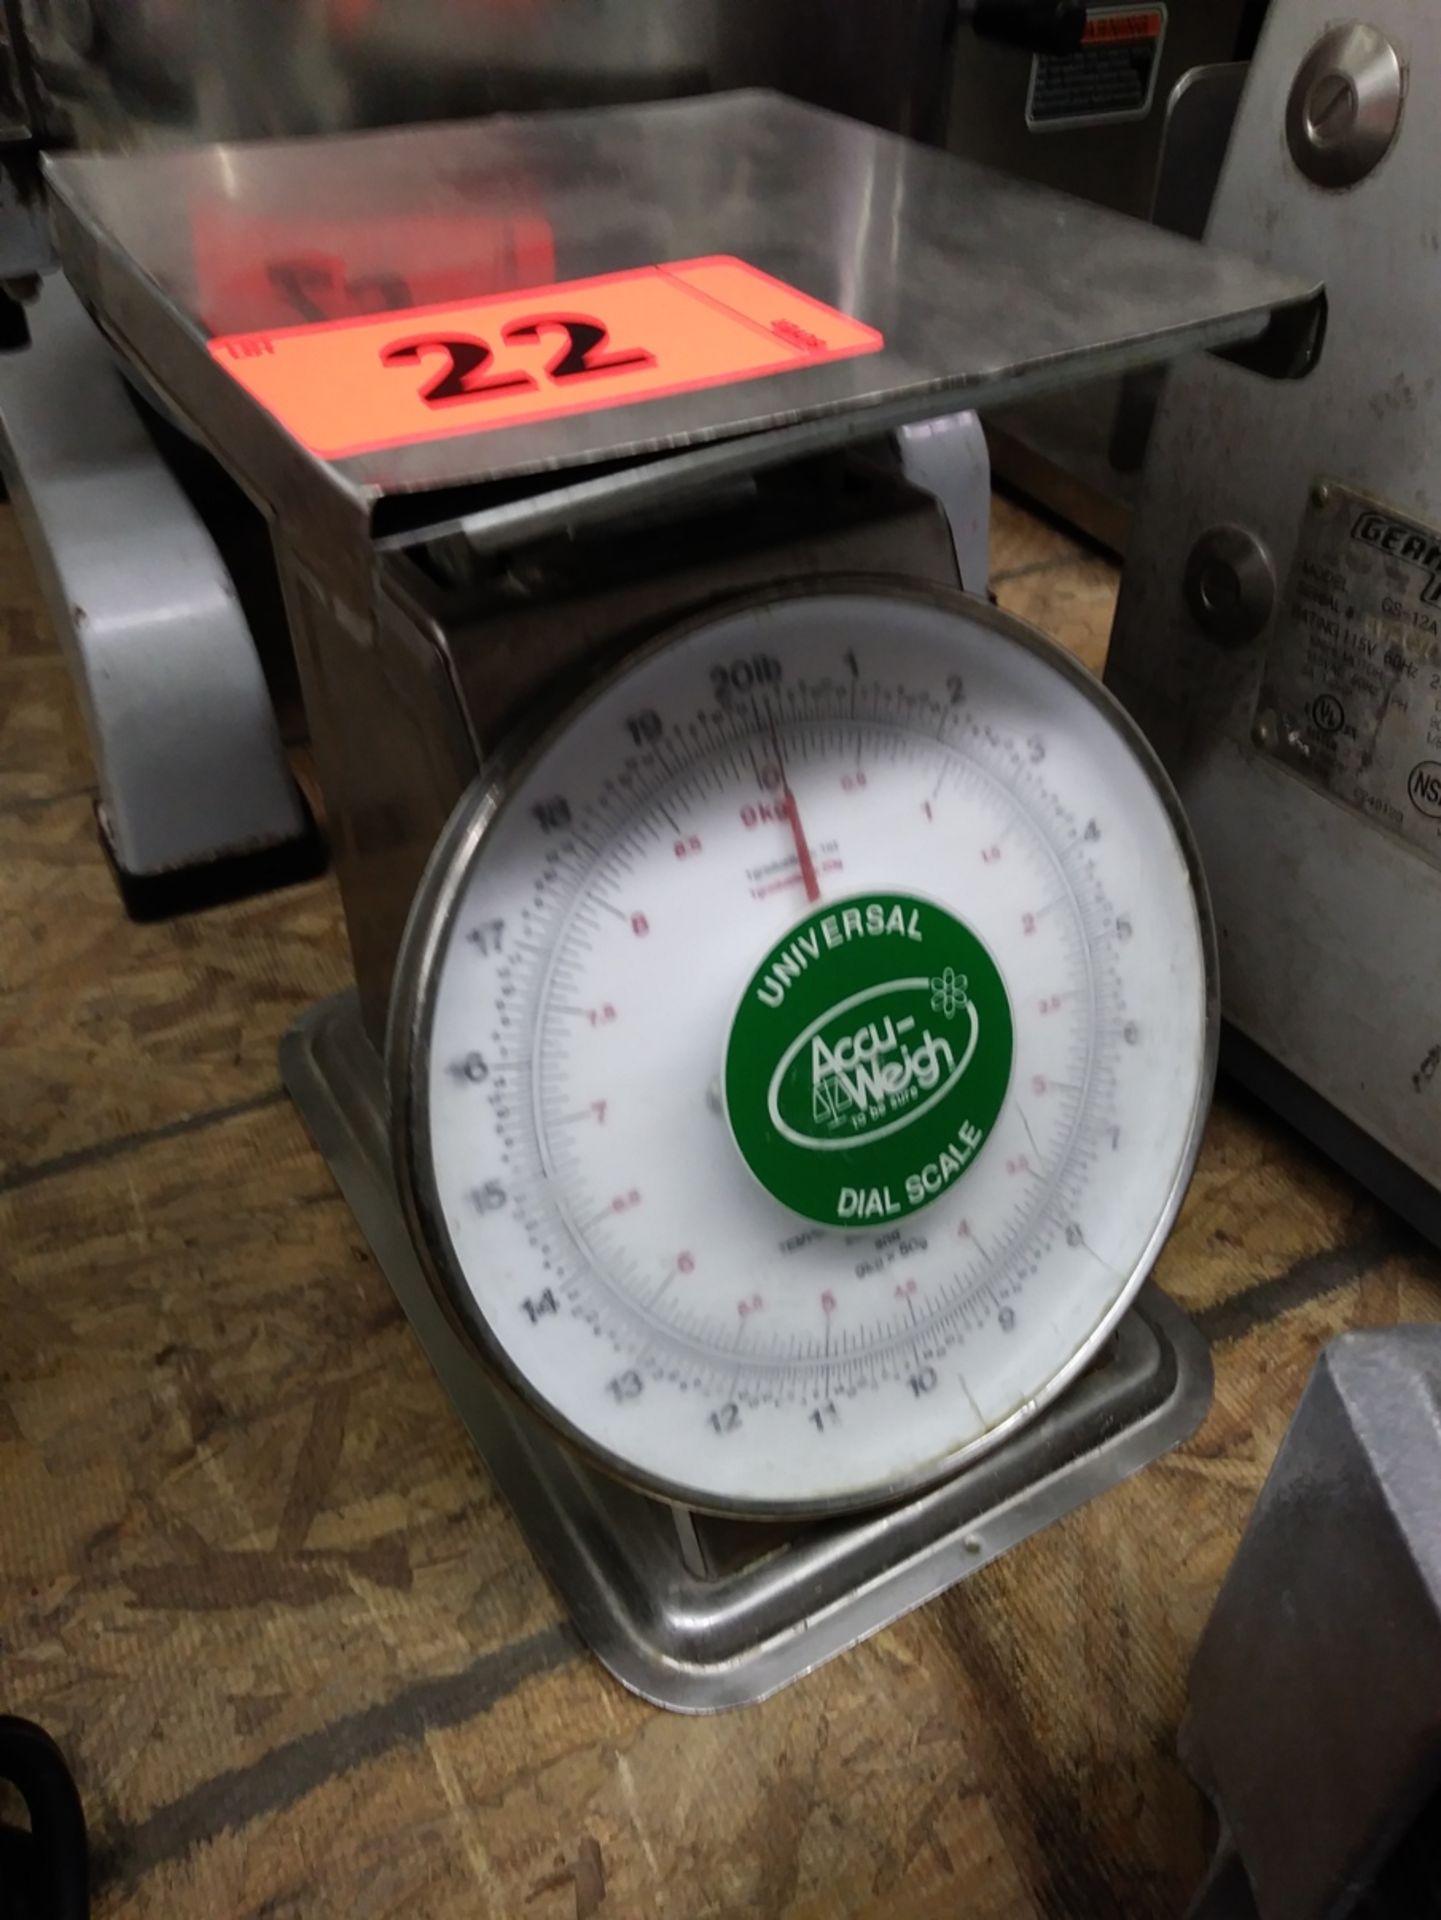 UNIVERSAL ACC-WEIGH DIAL SCALE 20LB - Image 3 of 5